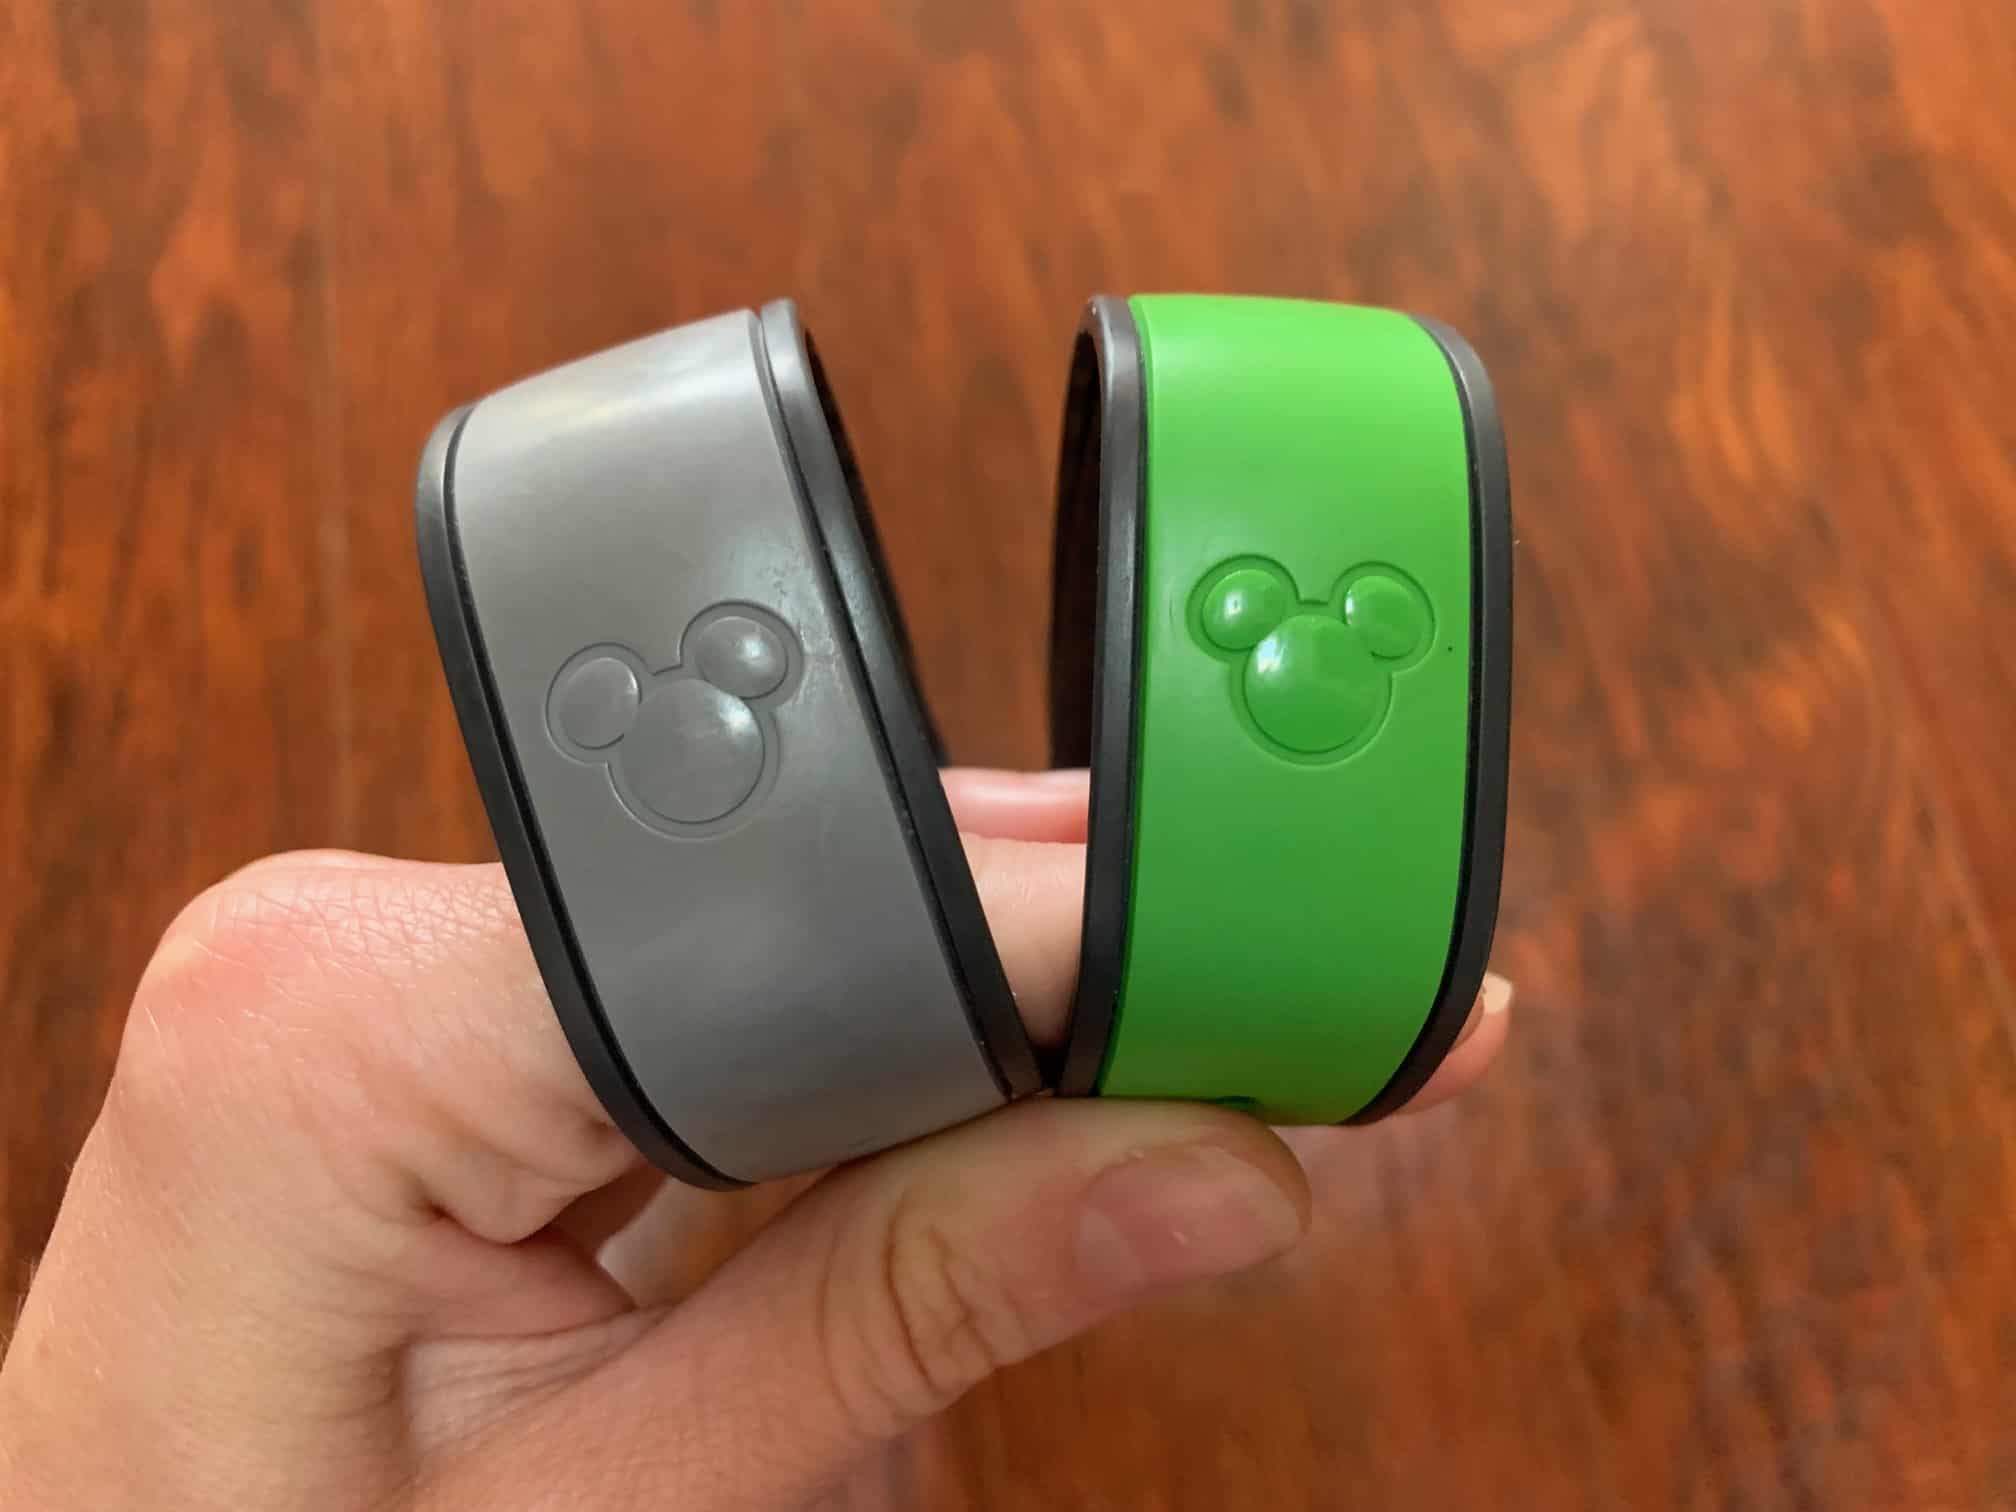 Magic bands for fast pass+ at Disney World